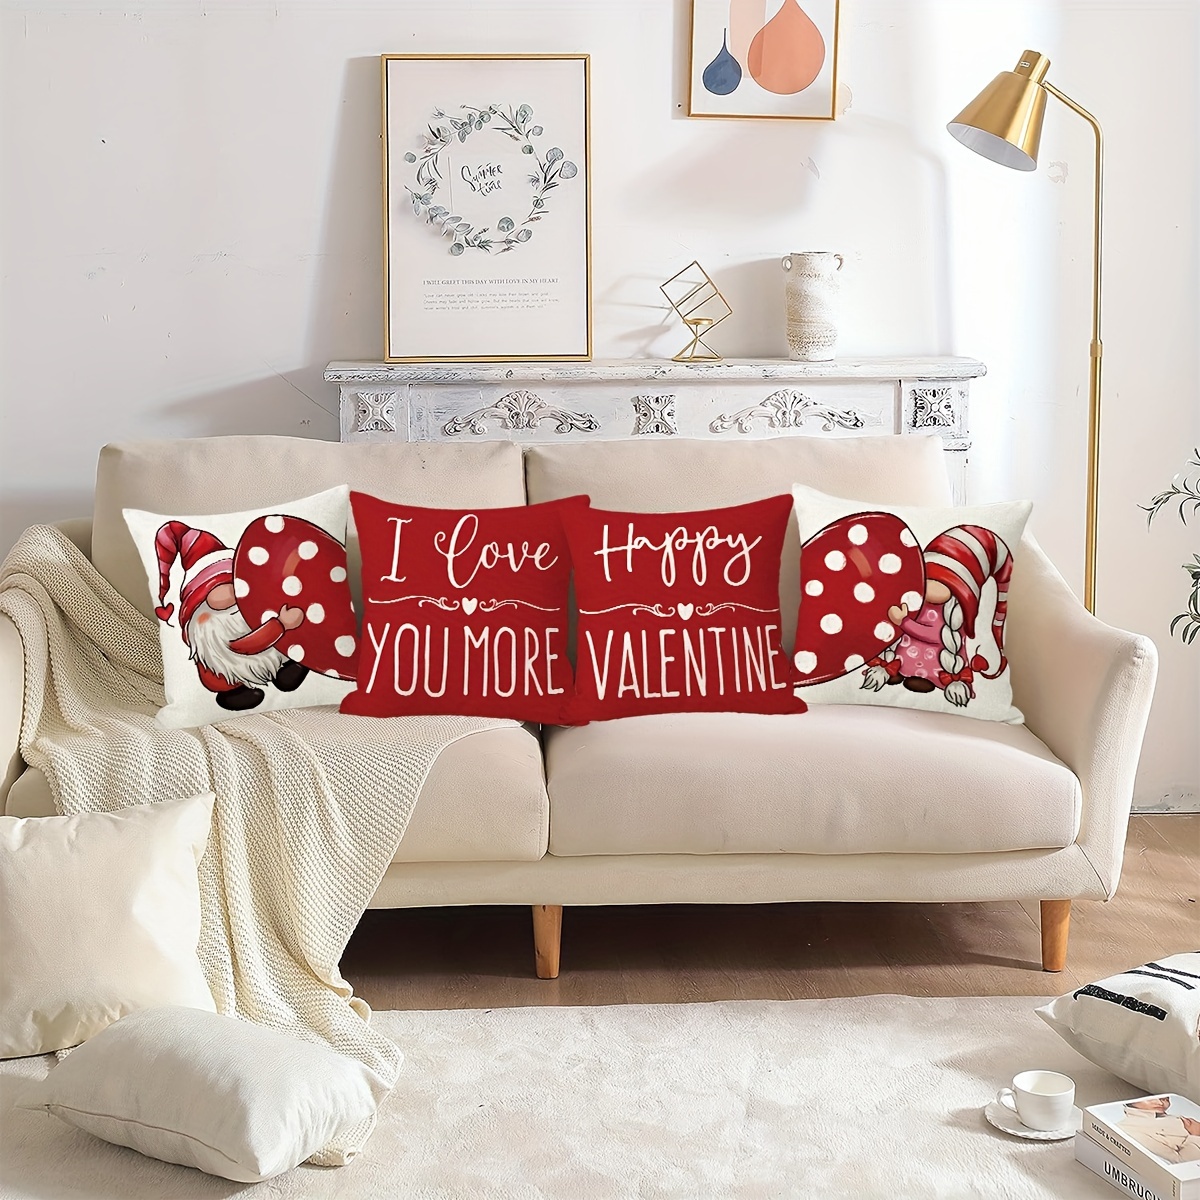  Valentine Pillow Covers 18×18 Inch Red Love Heart Valentine  Holiday Cushion Pillow Case Decorative Throw Cushion Cases for Sofa Couch  Valentine Farmhouse Living Room Deal : Home & Kitchen